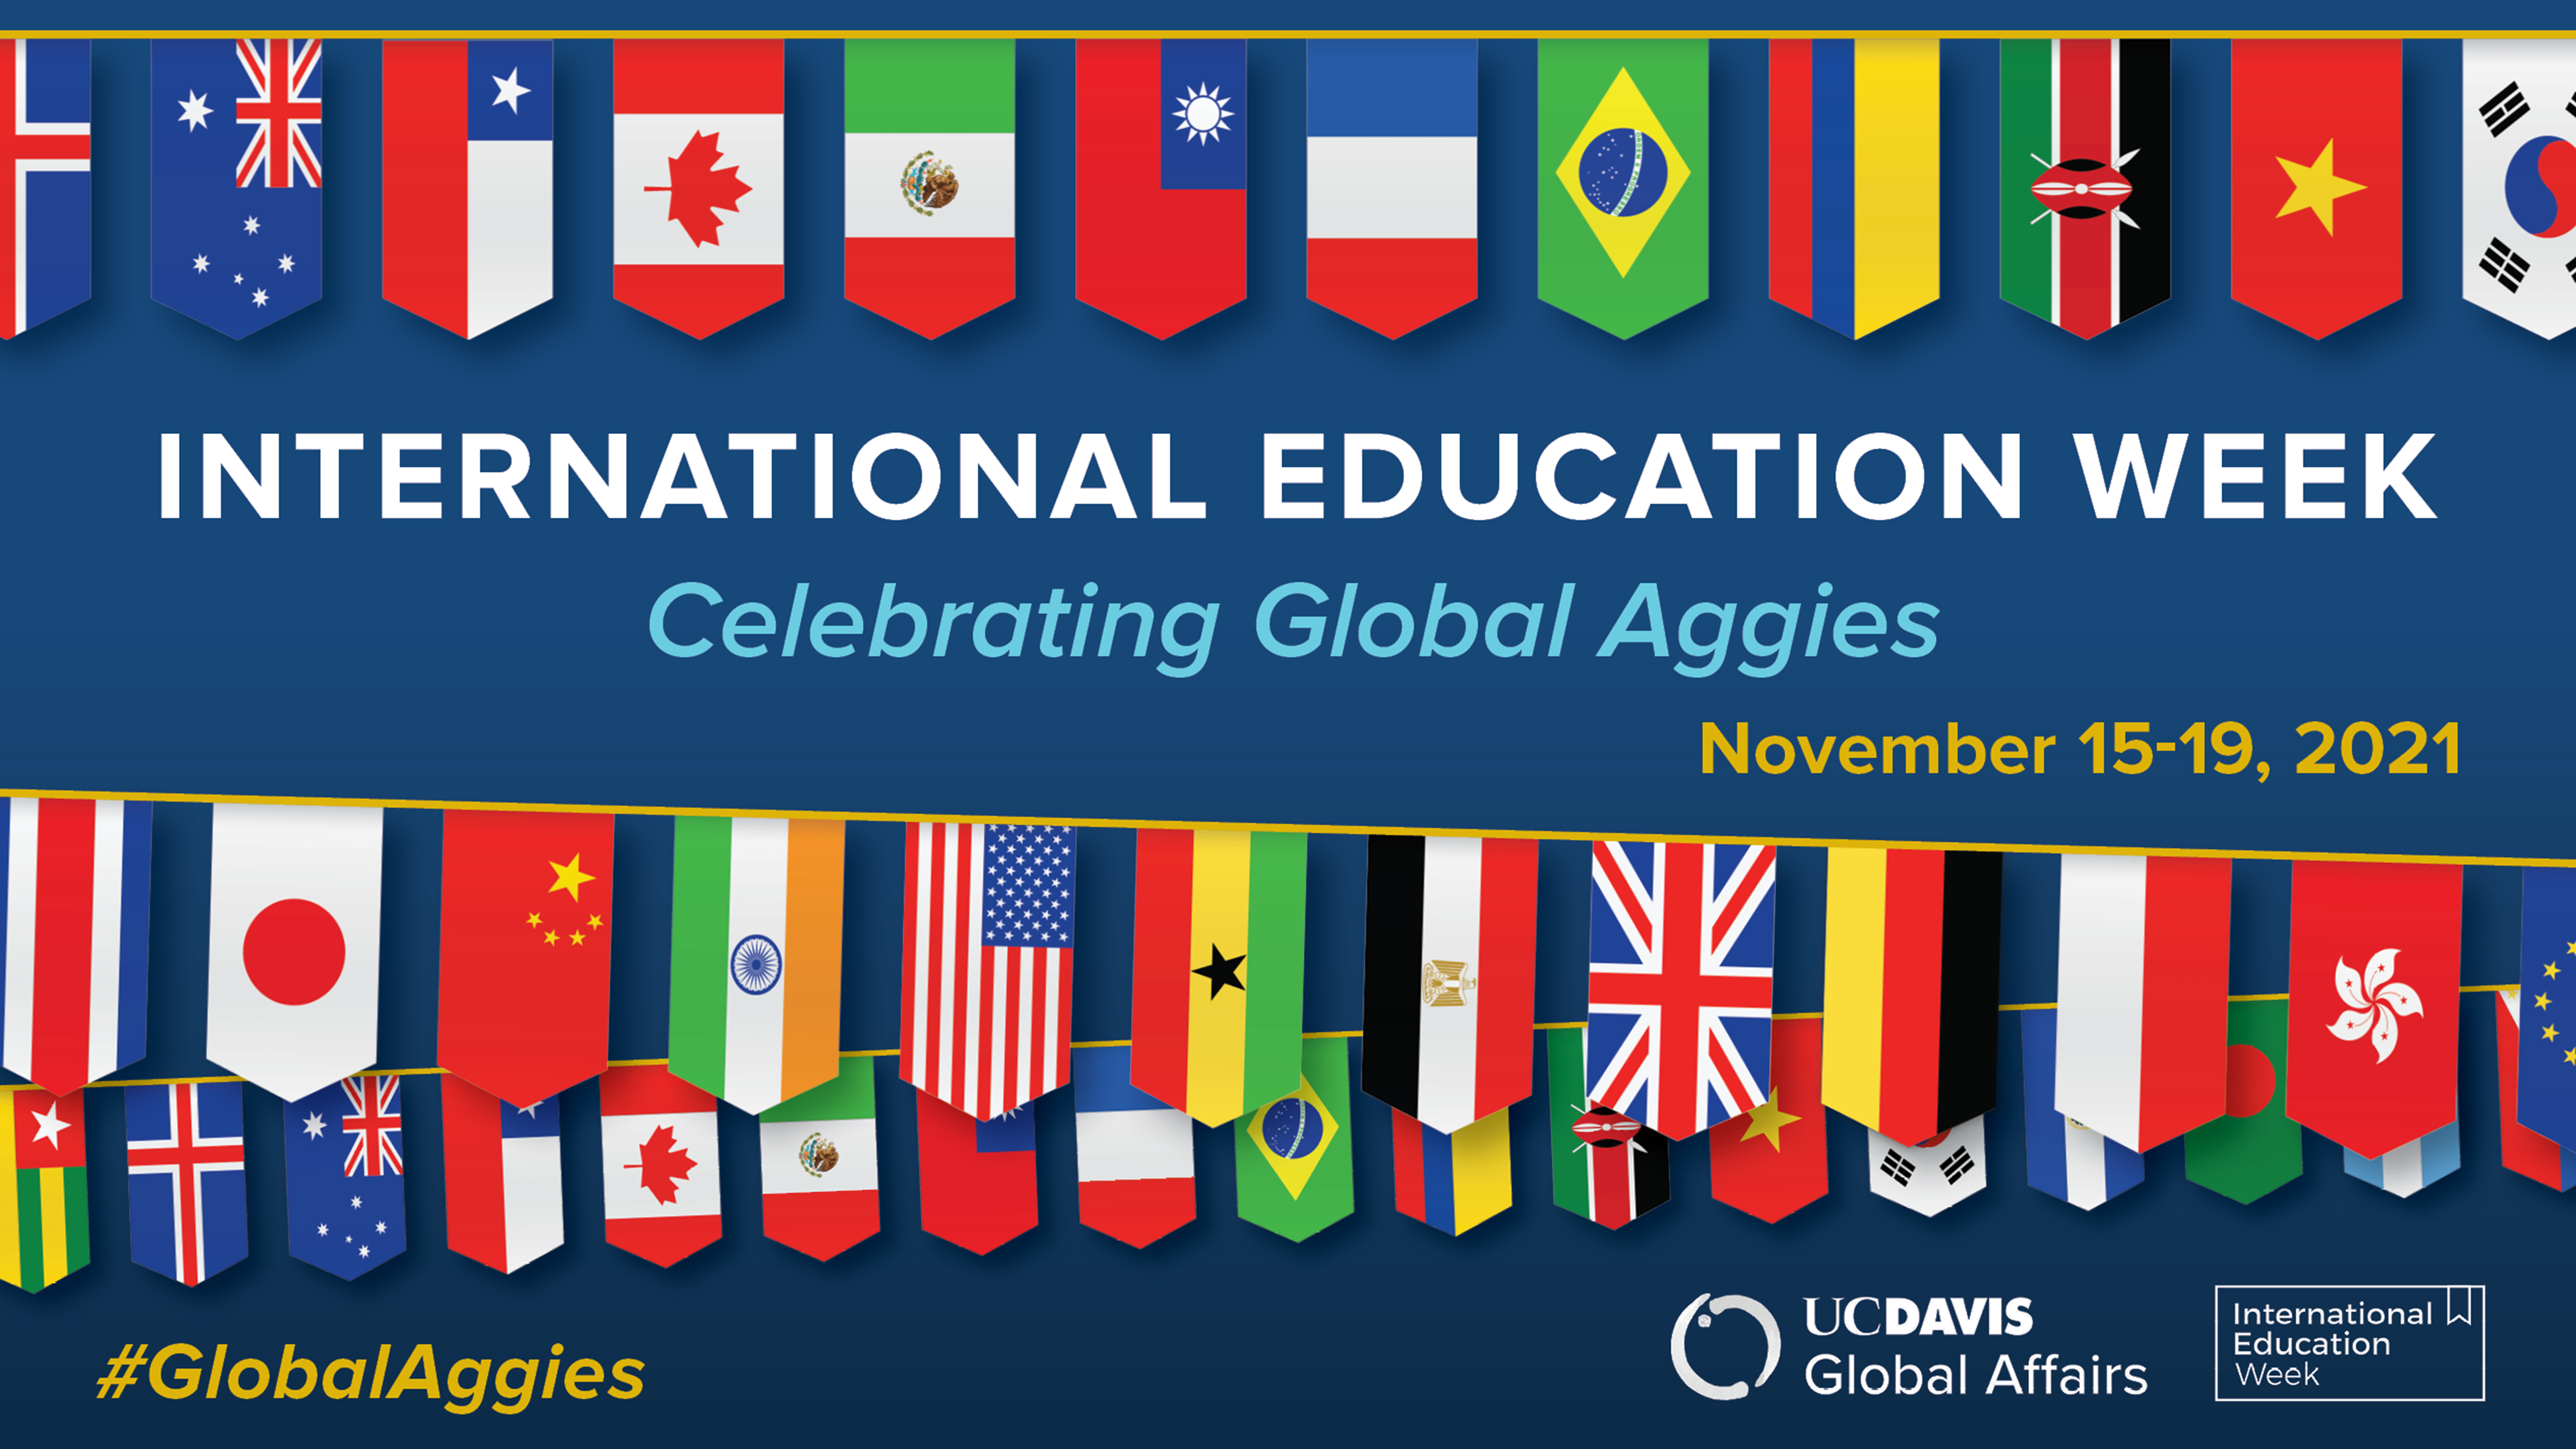 Graphic for International Education Week - international flags draping up and down